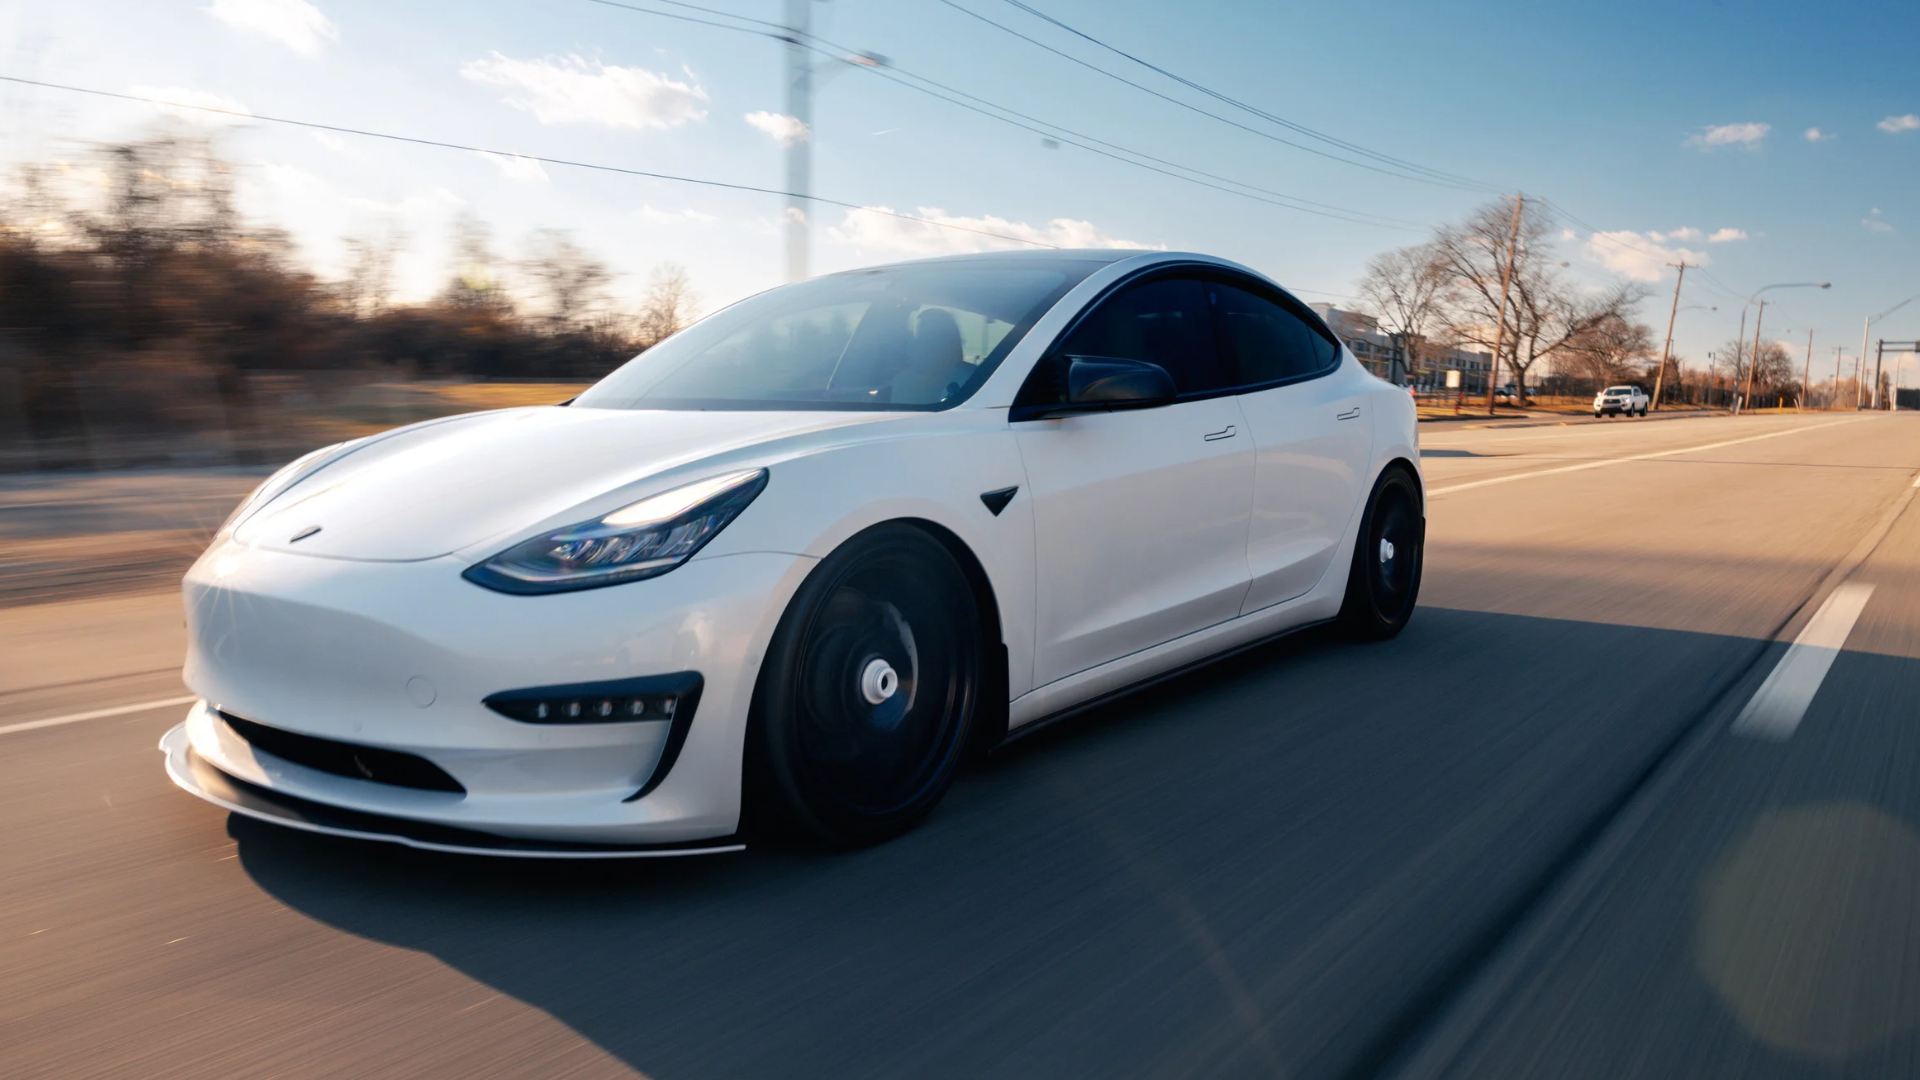 A Tesla vehicle driving down the road. Photo by: Canva.com.